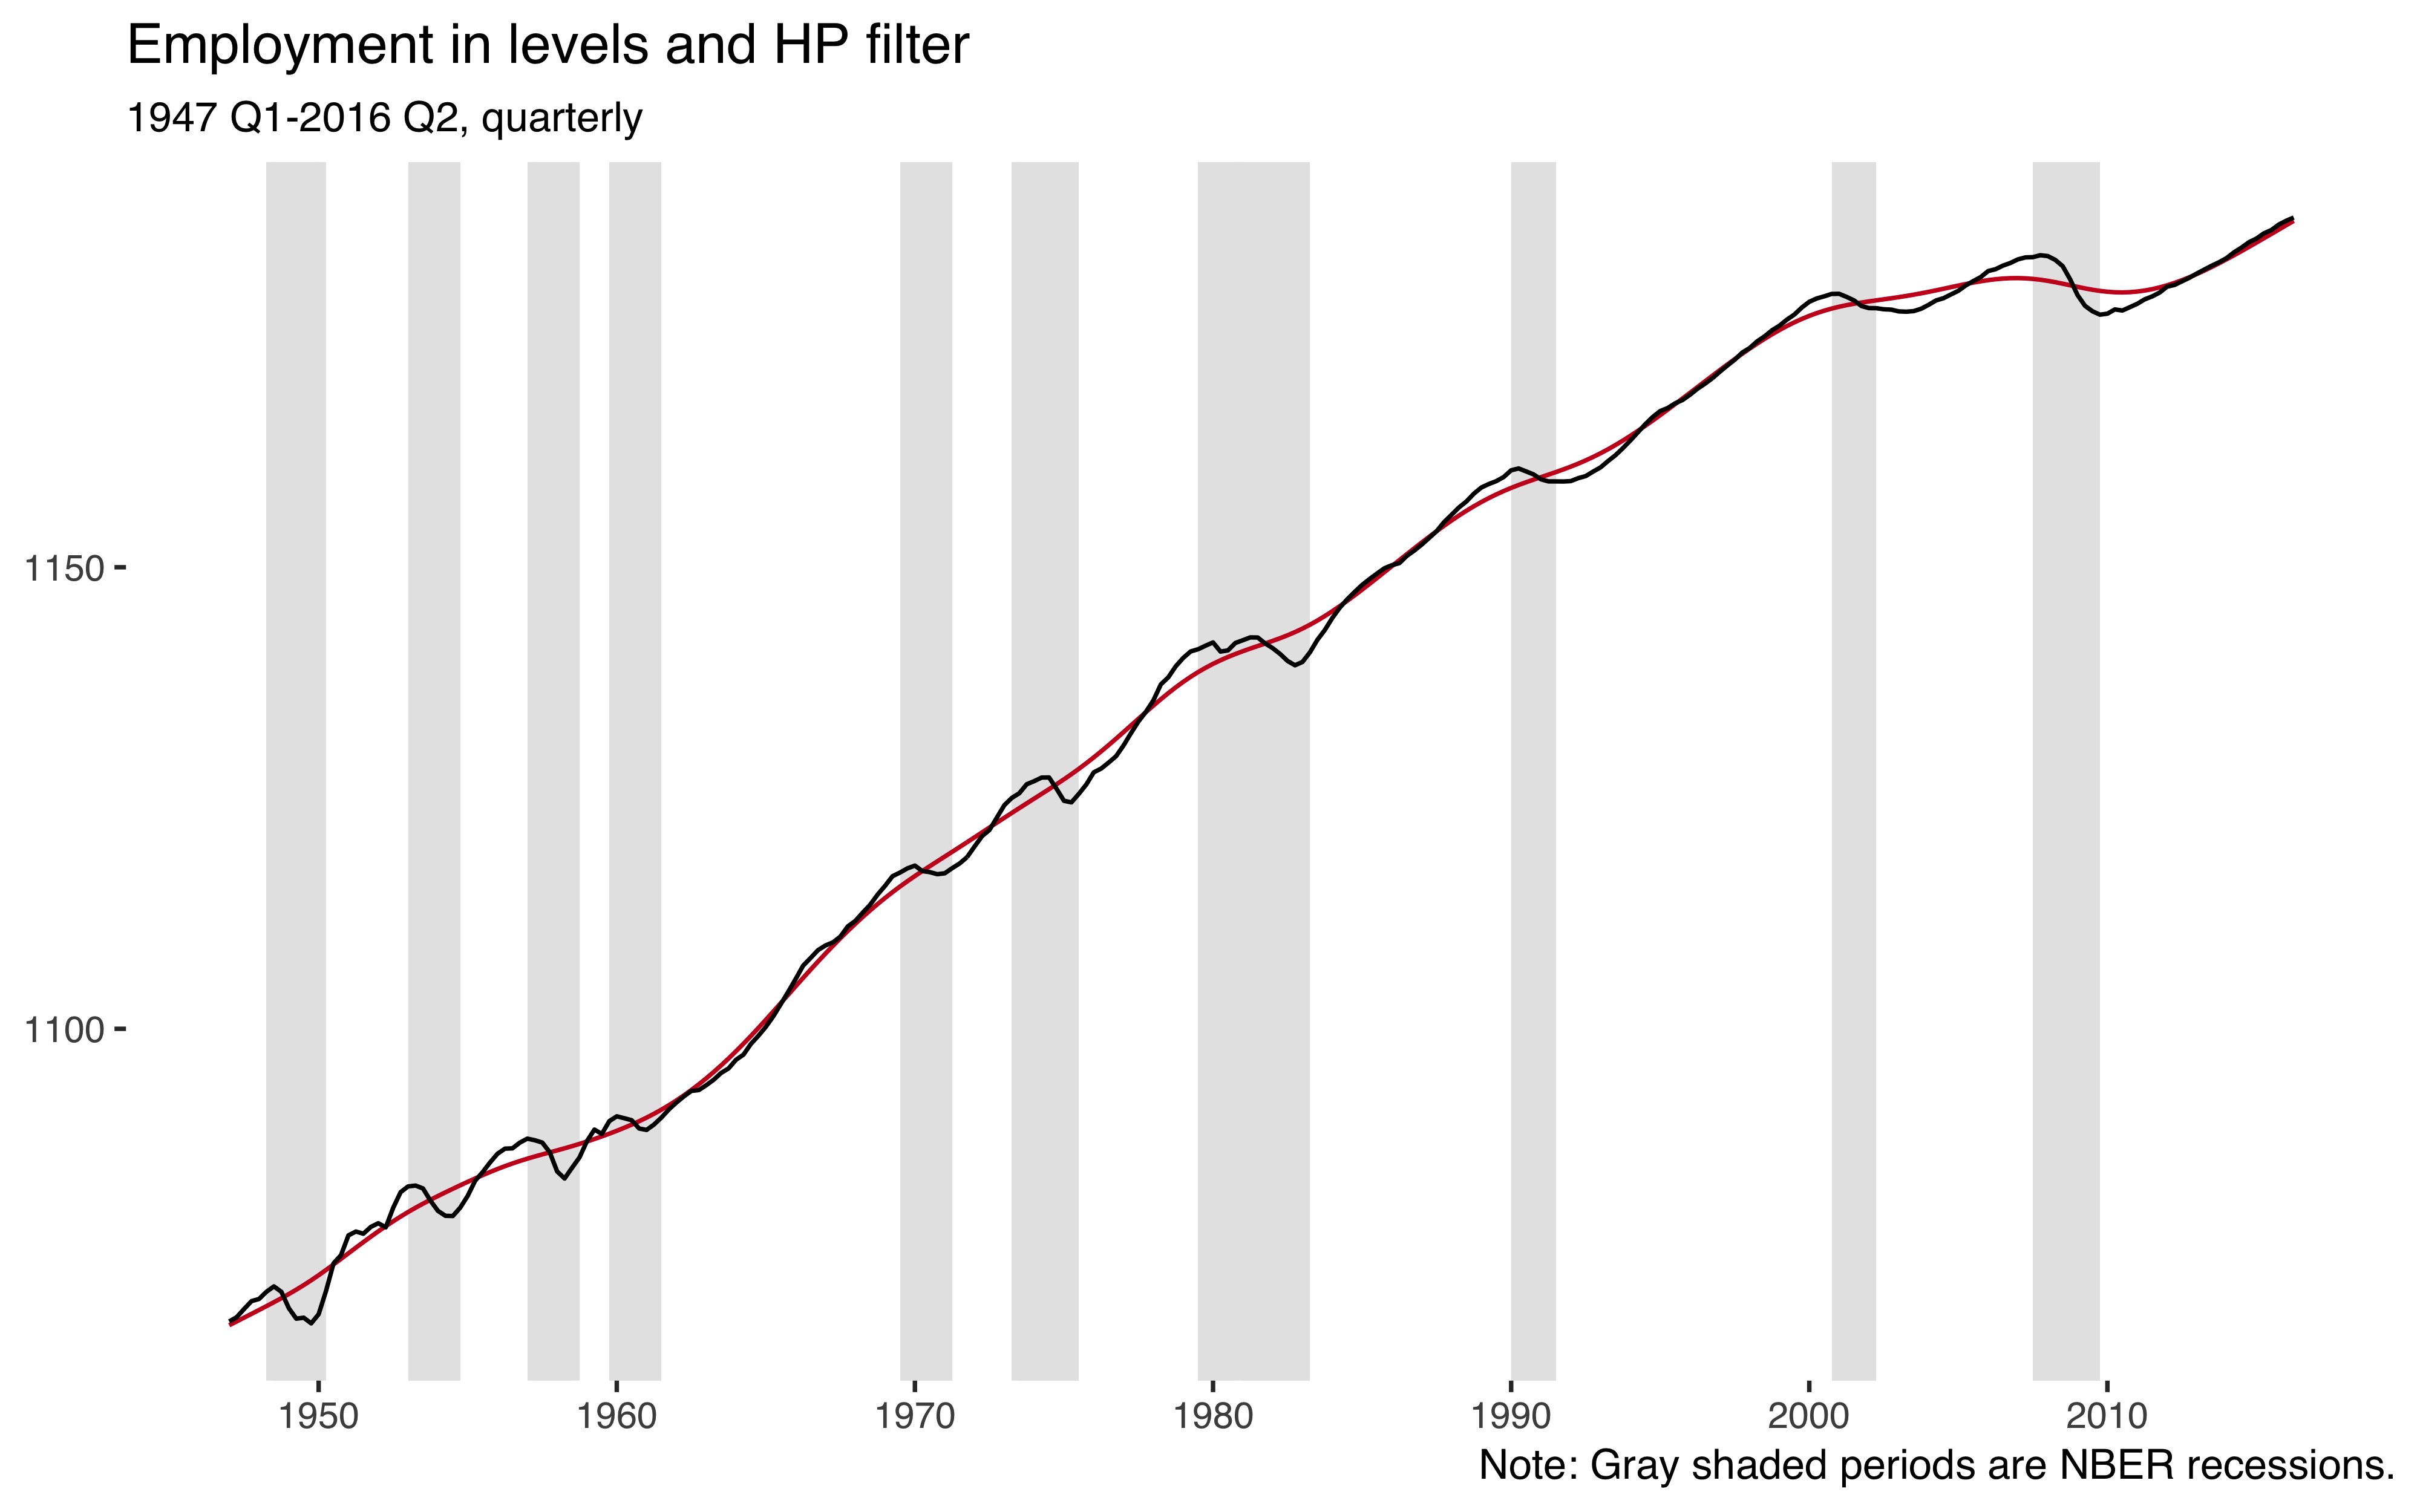 Nonfarms employment quarterly 1947-2016 and trend from HP filter